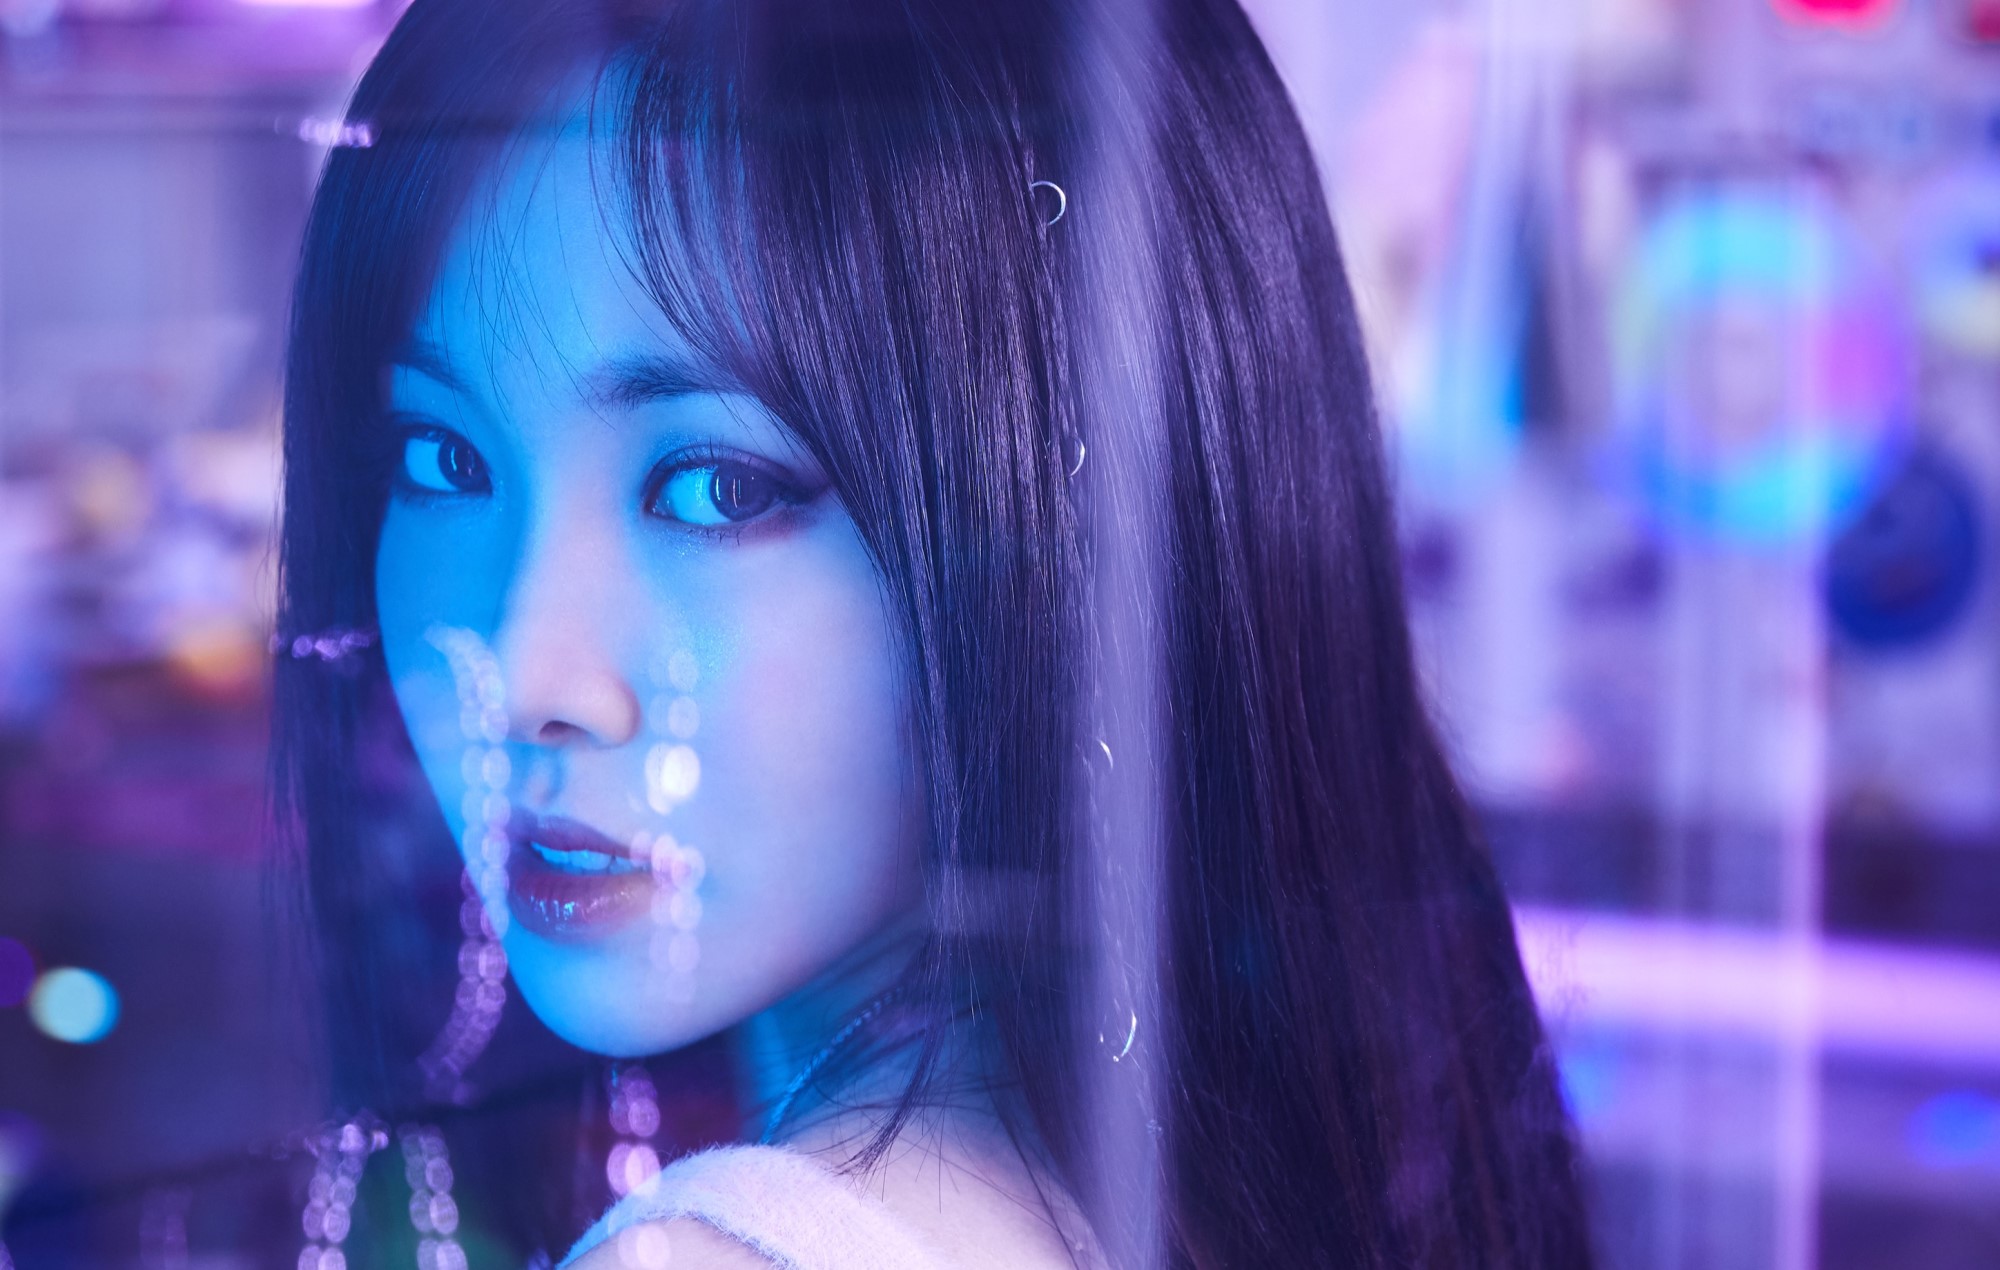 Yuju on her rebirth as a soloist: “Obviously, I’m really worried about doing this alone”